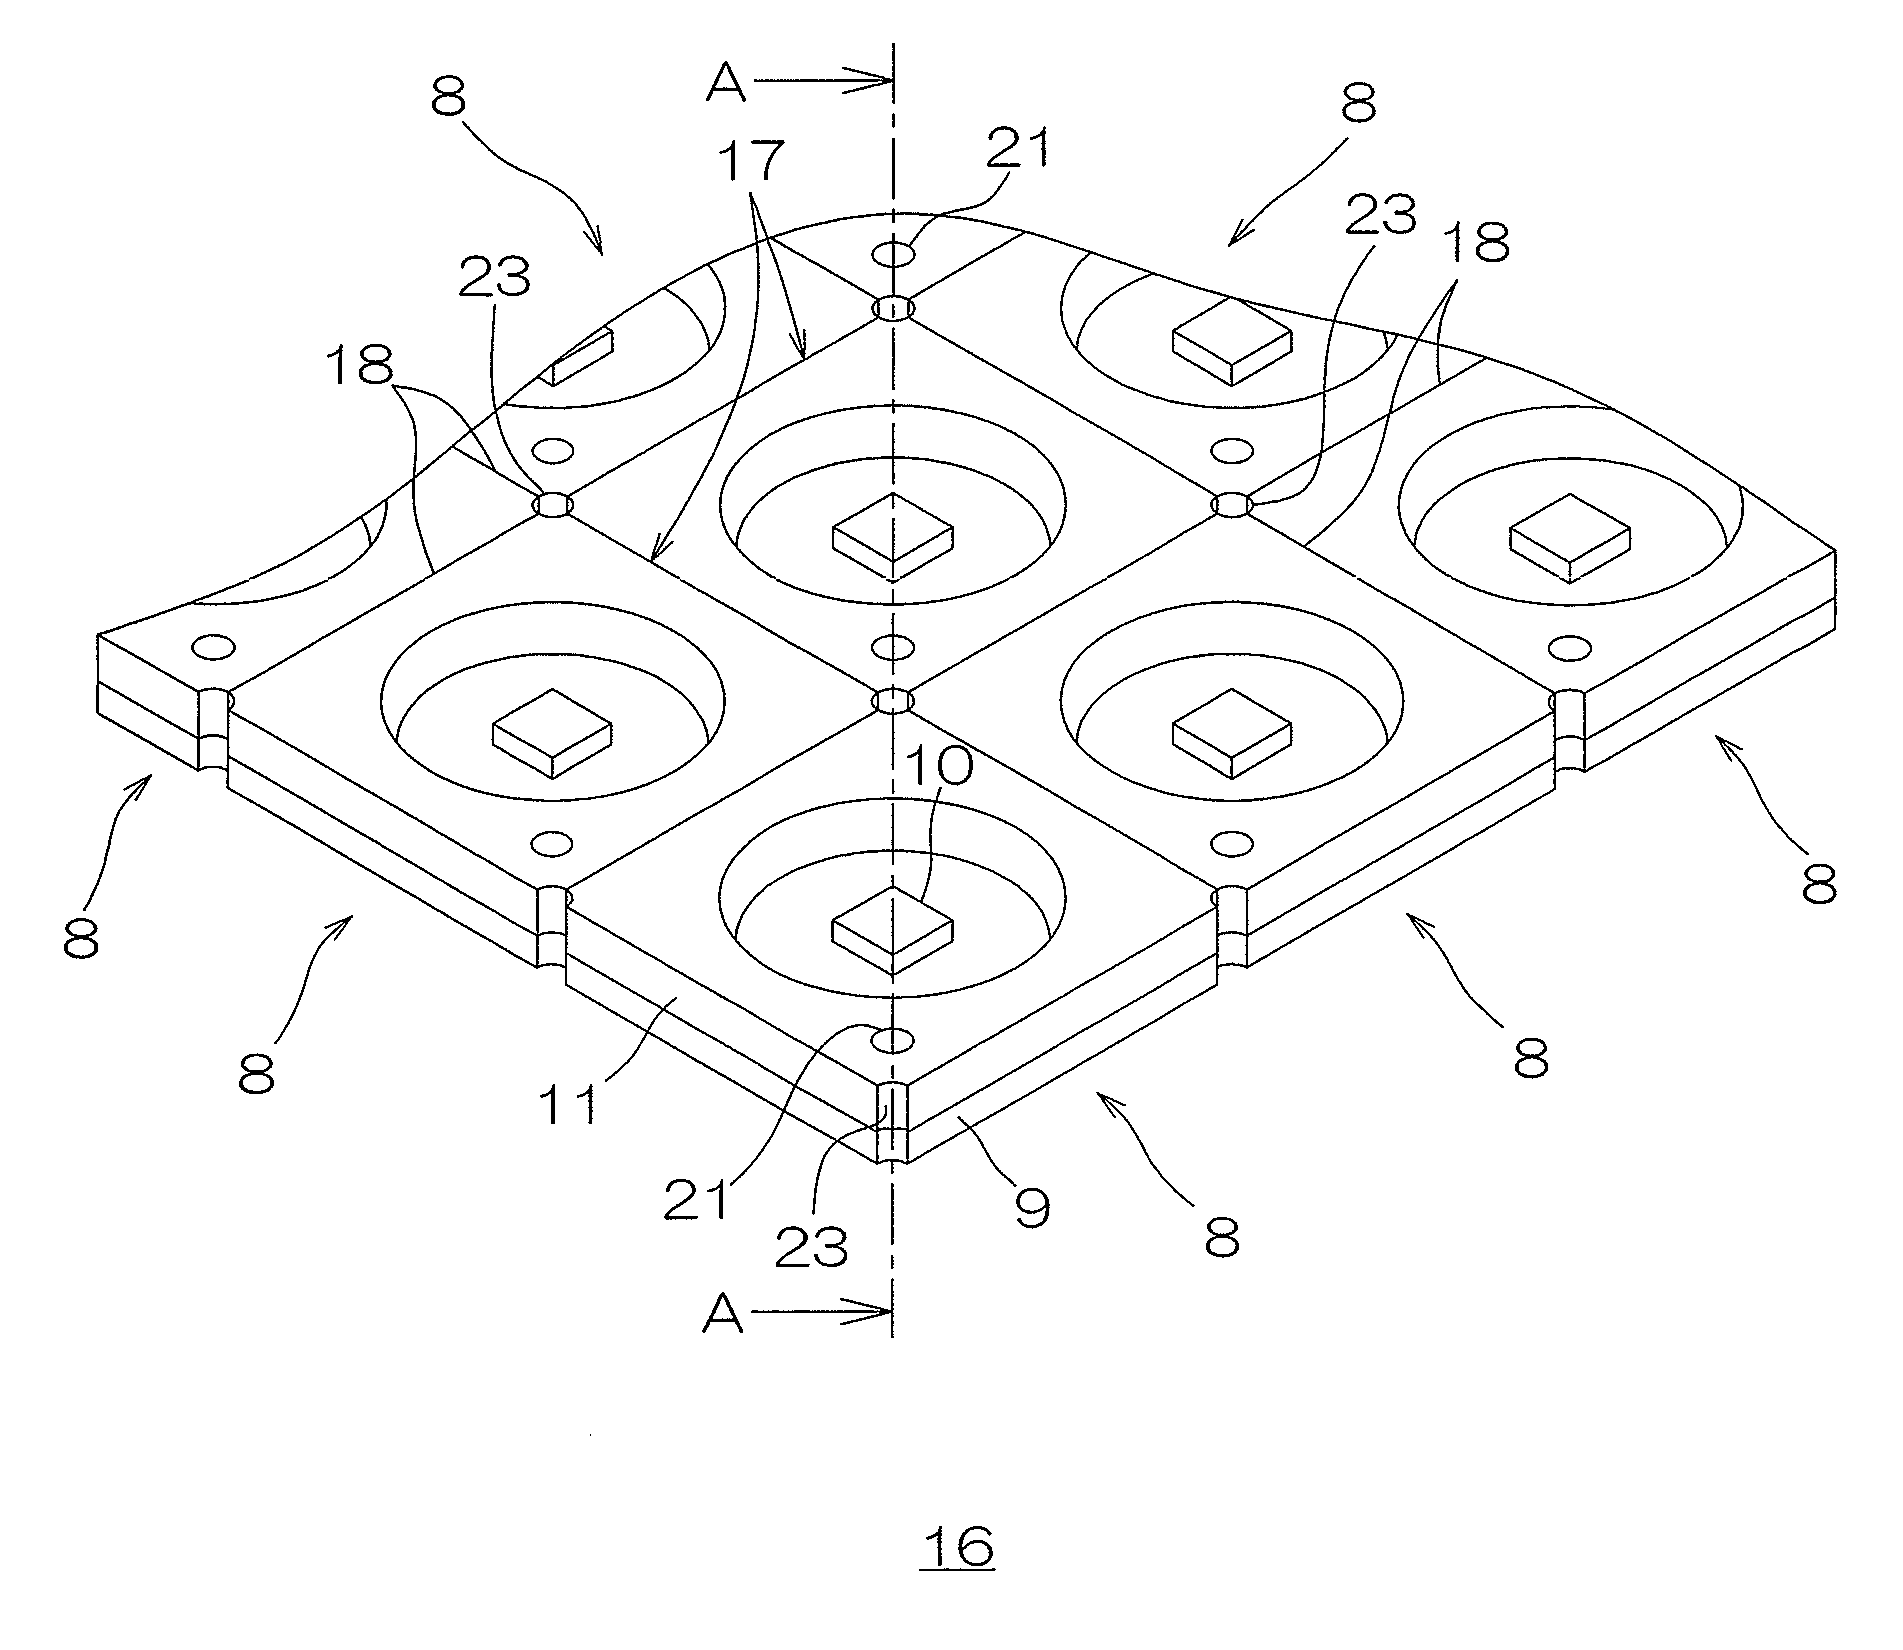 Phosphor adhesive sheet, light emitting diode element including phosphor layer, light emitting diode device, and producing methods thereof